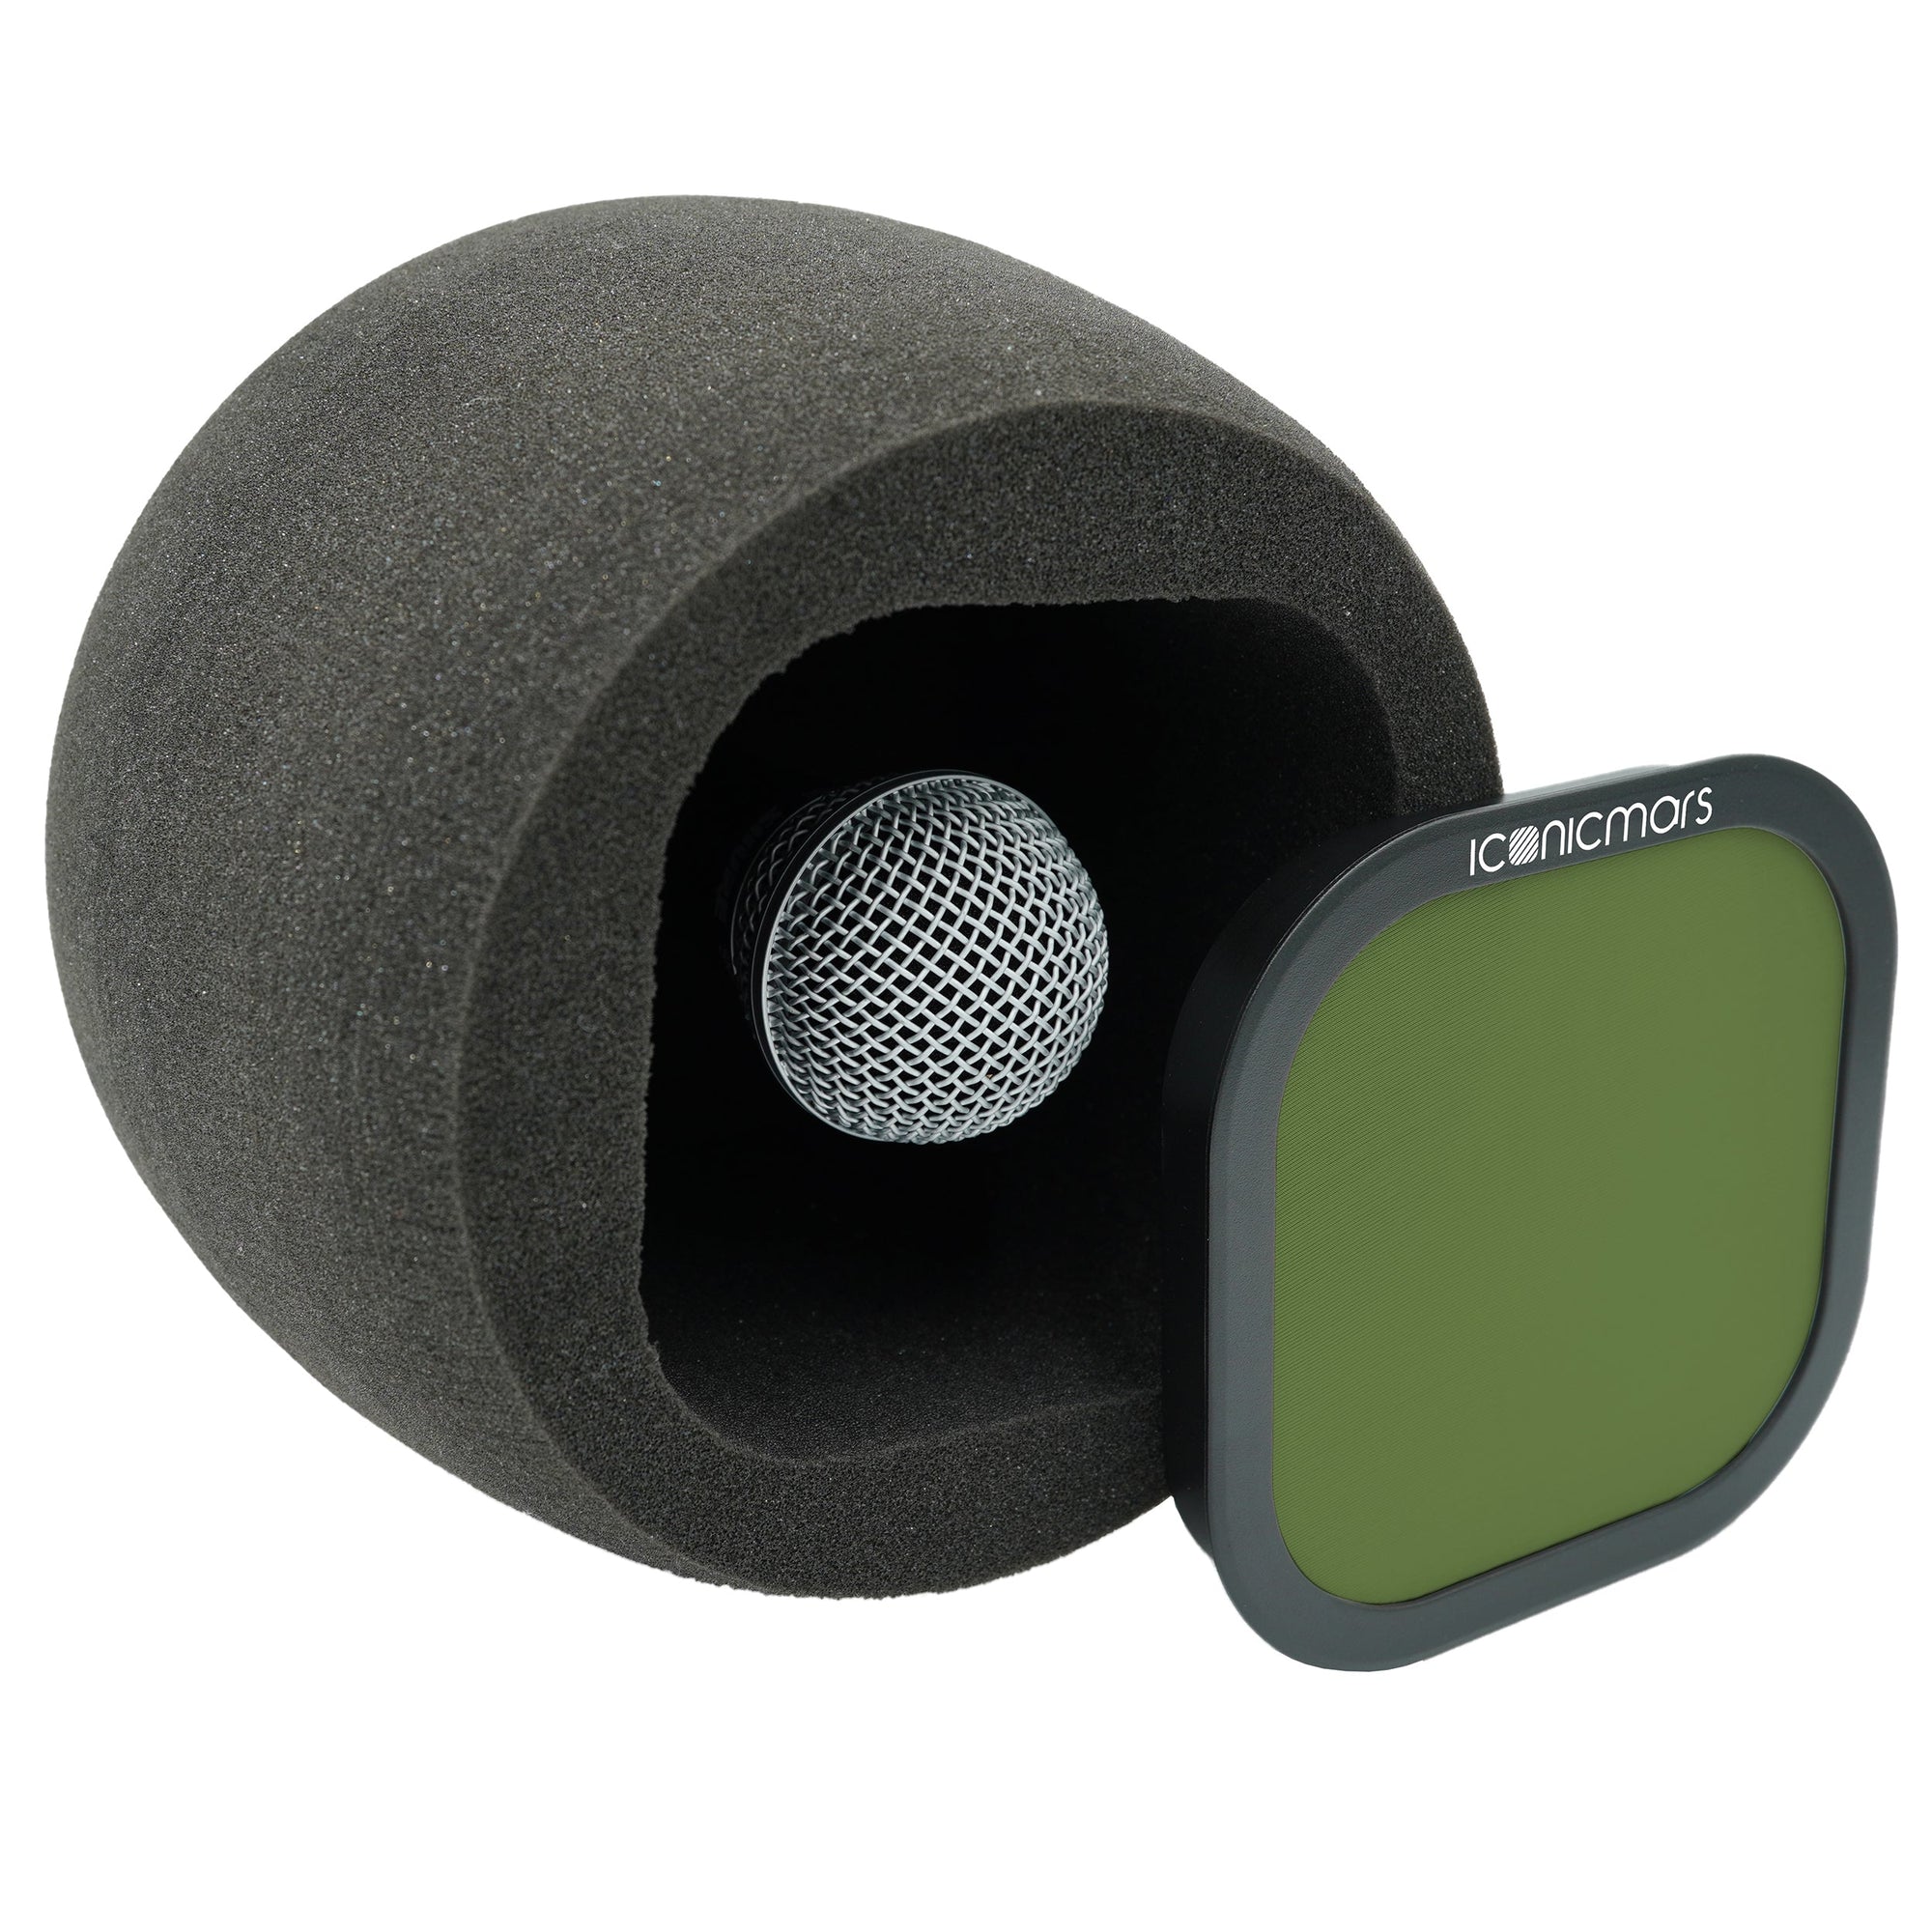 Comet X7A side view with pop filter off showing mic chamber, eyeball like design for front facing micrphone  -- Olive Green